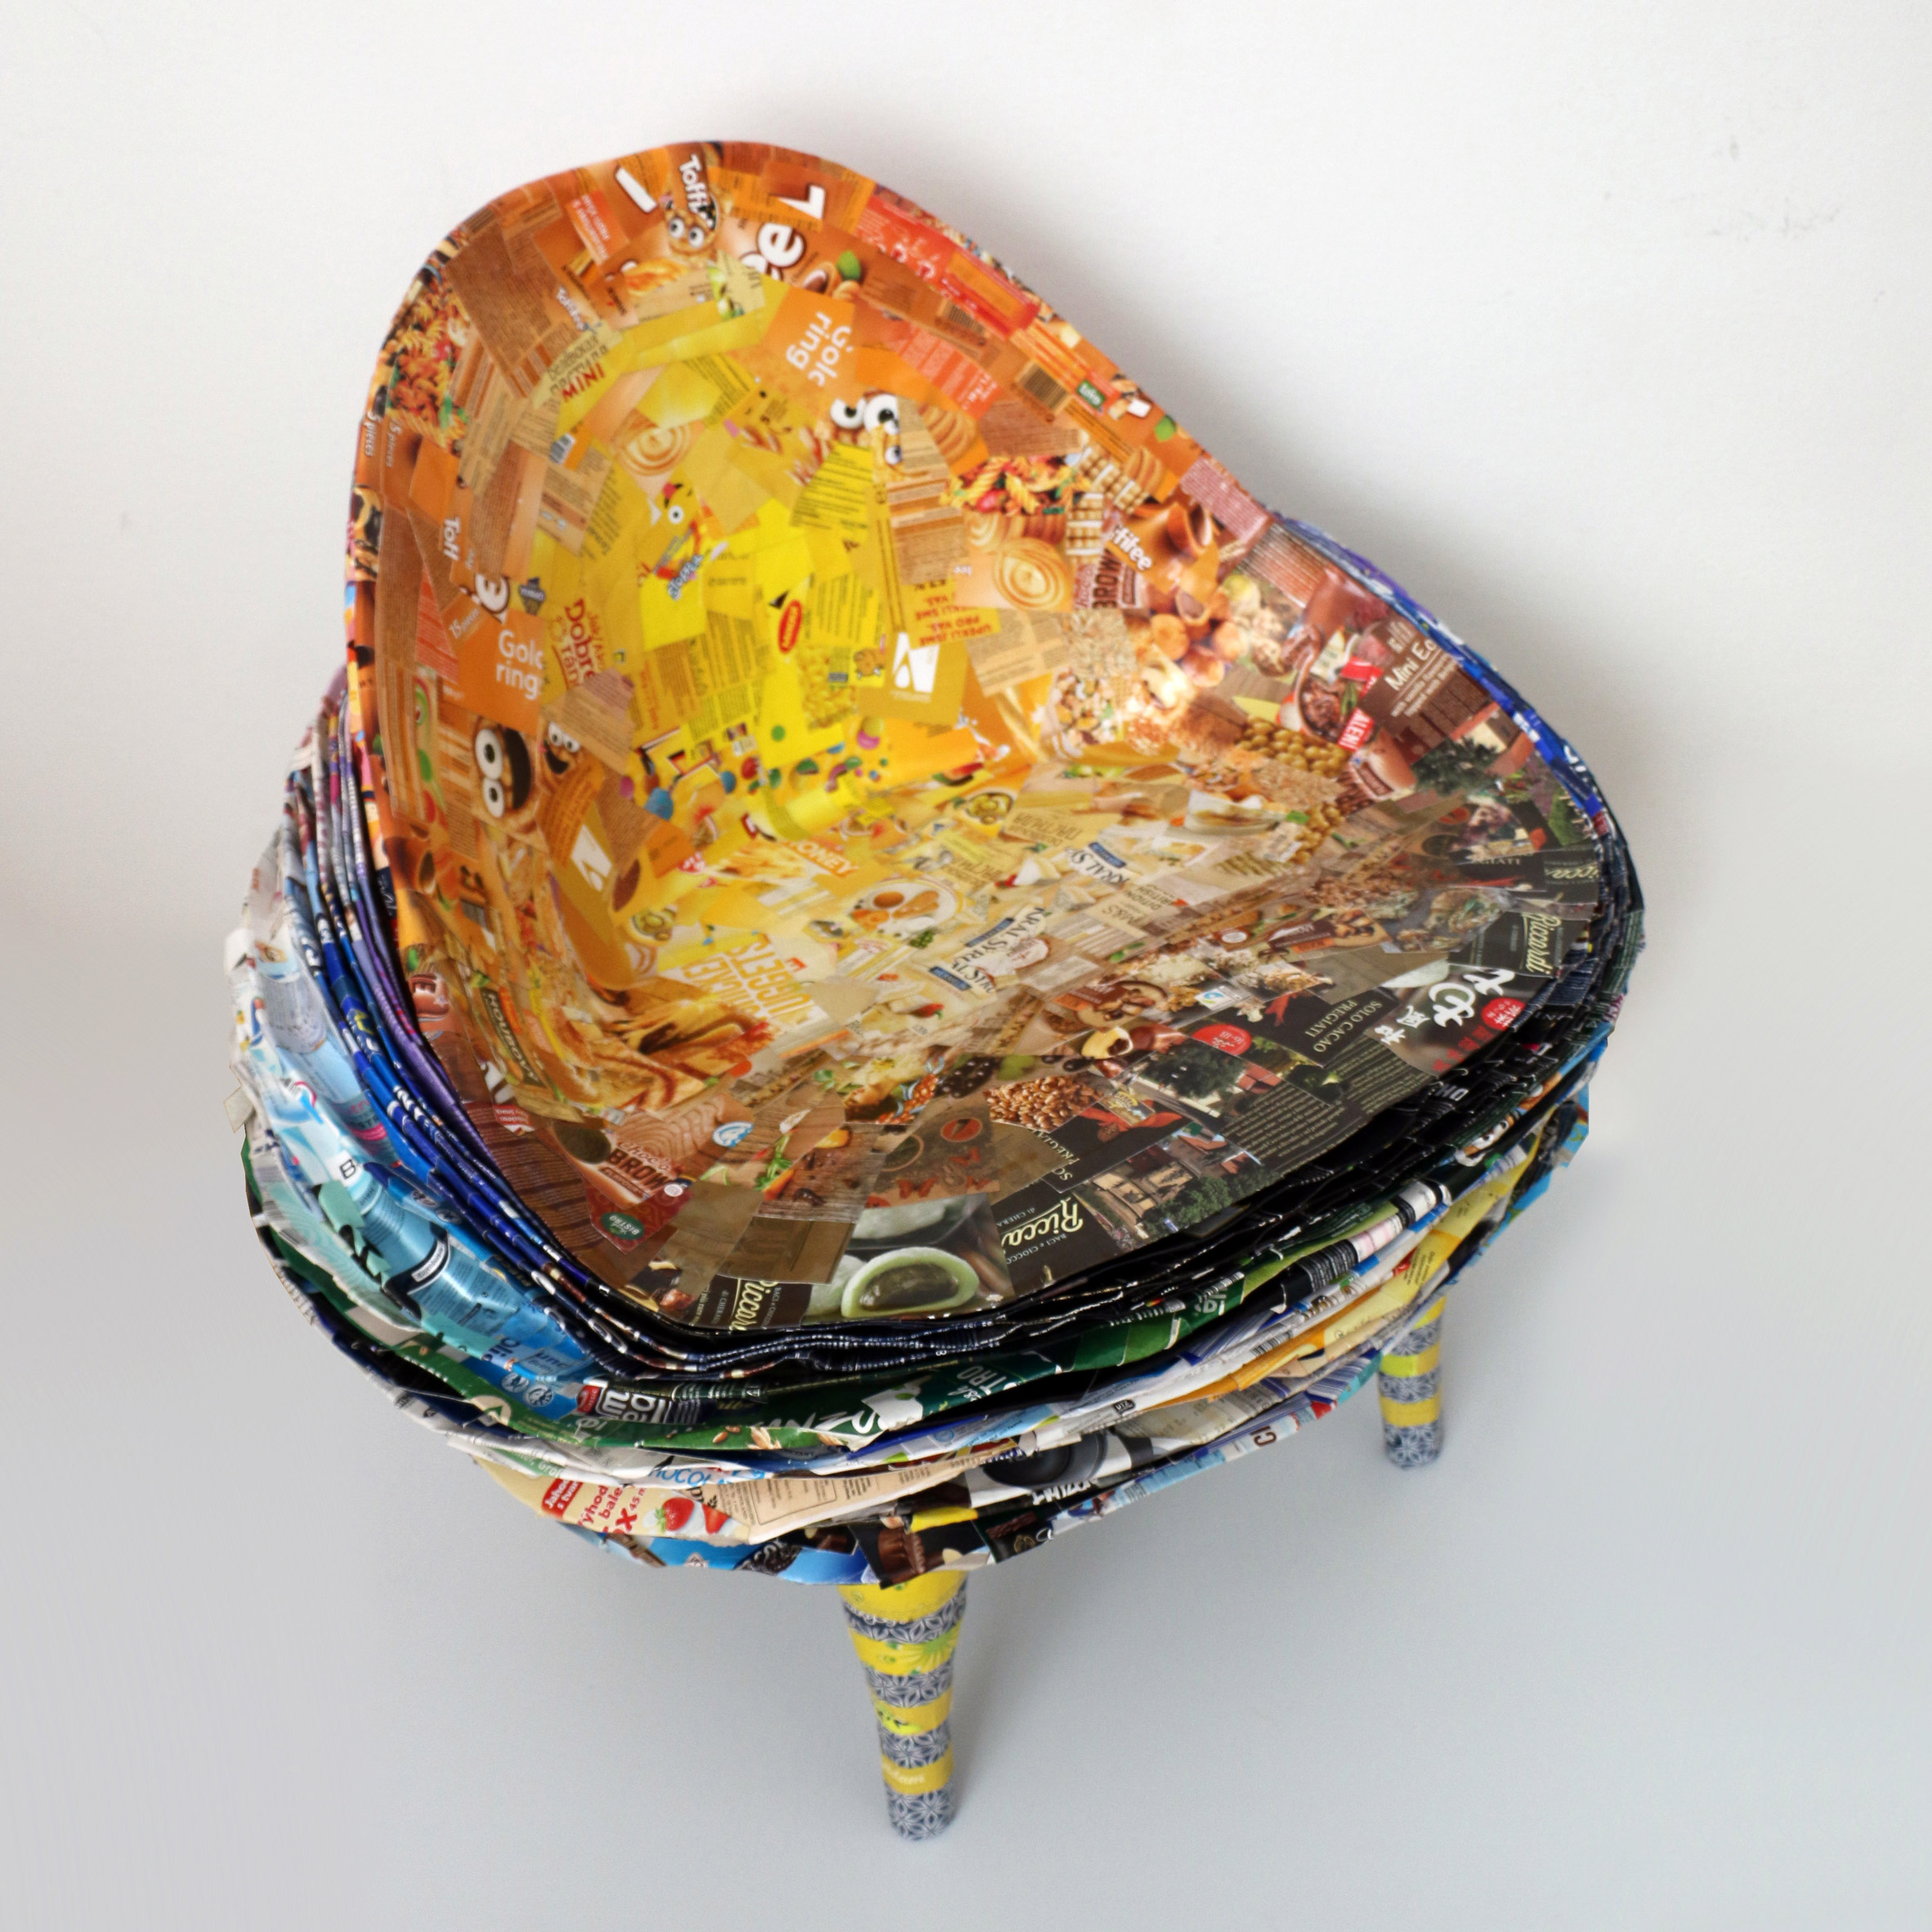 Chair made from recycled materials